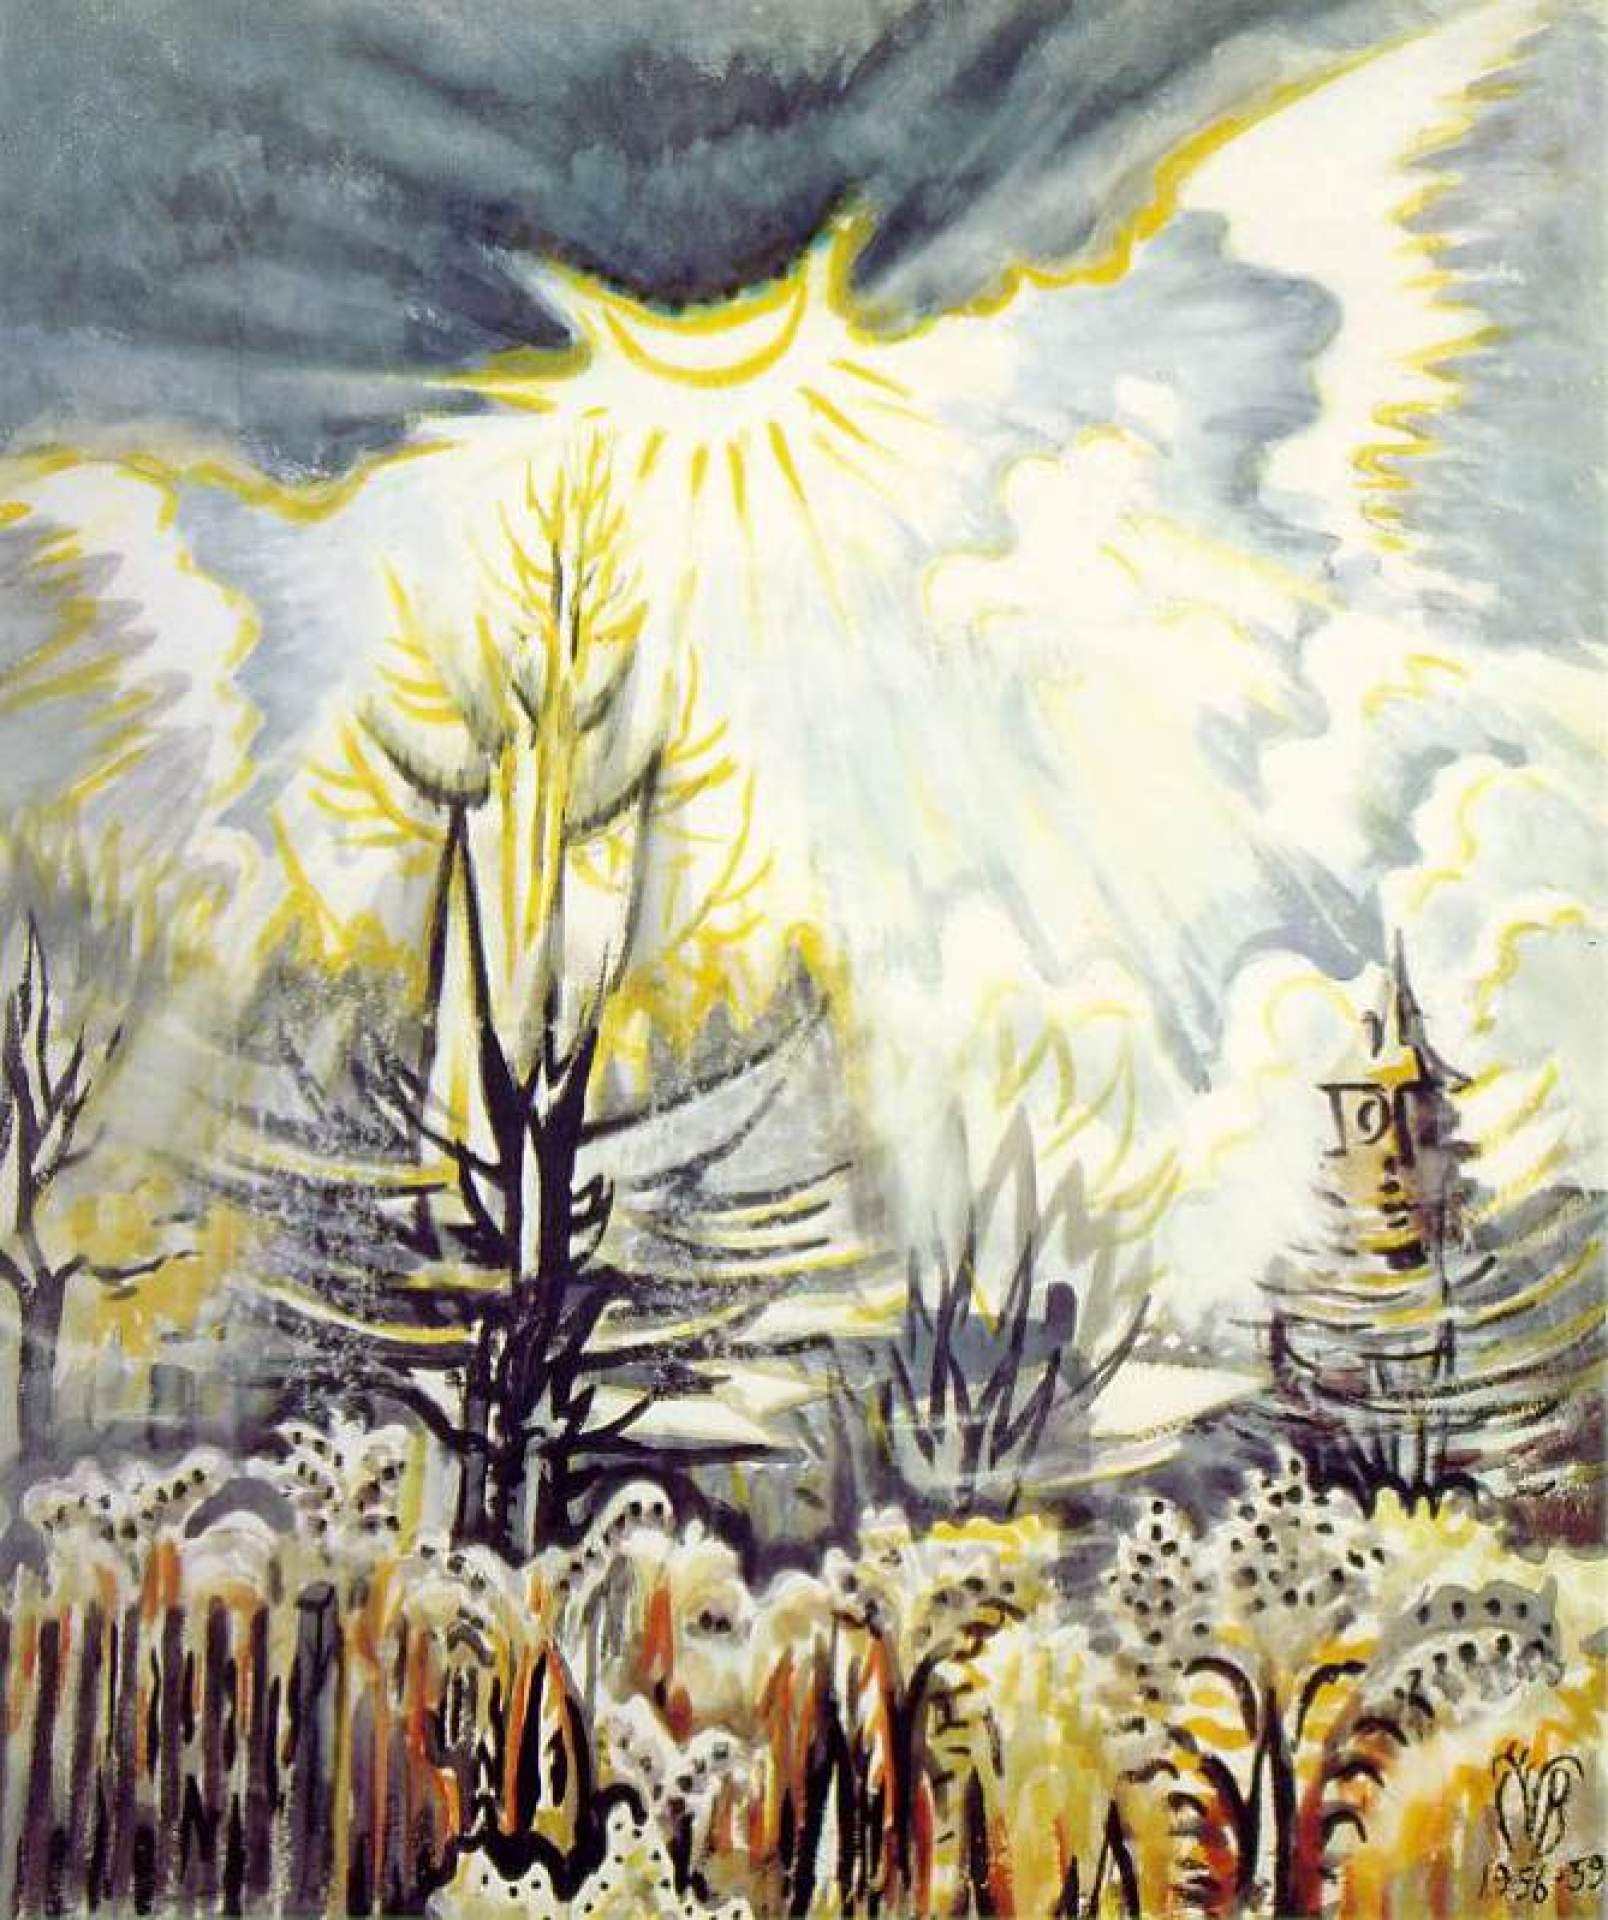 Charles Burchfield: American Landscapes on view at DC Moore Gallery, NYC